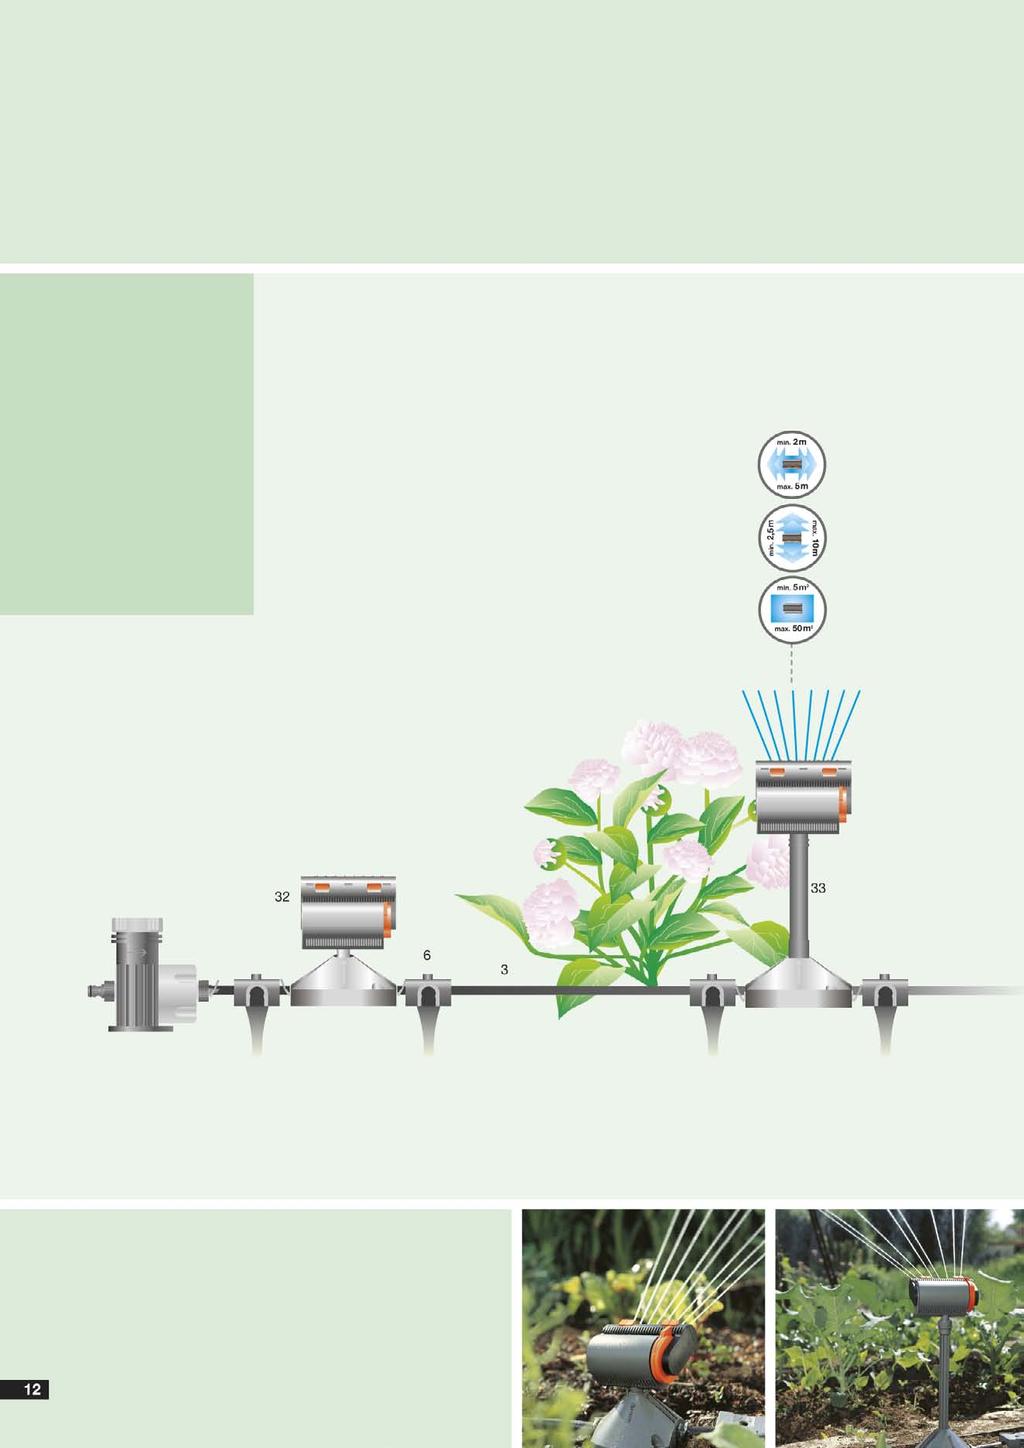 GARDENA Micro-Drip-System Extremely versatile Watering tip: We recommend watering your garden for a prolonged period once to twice a week.